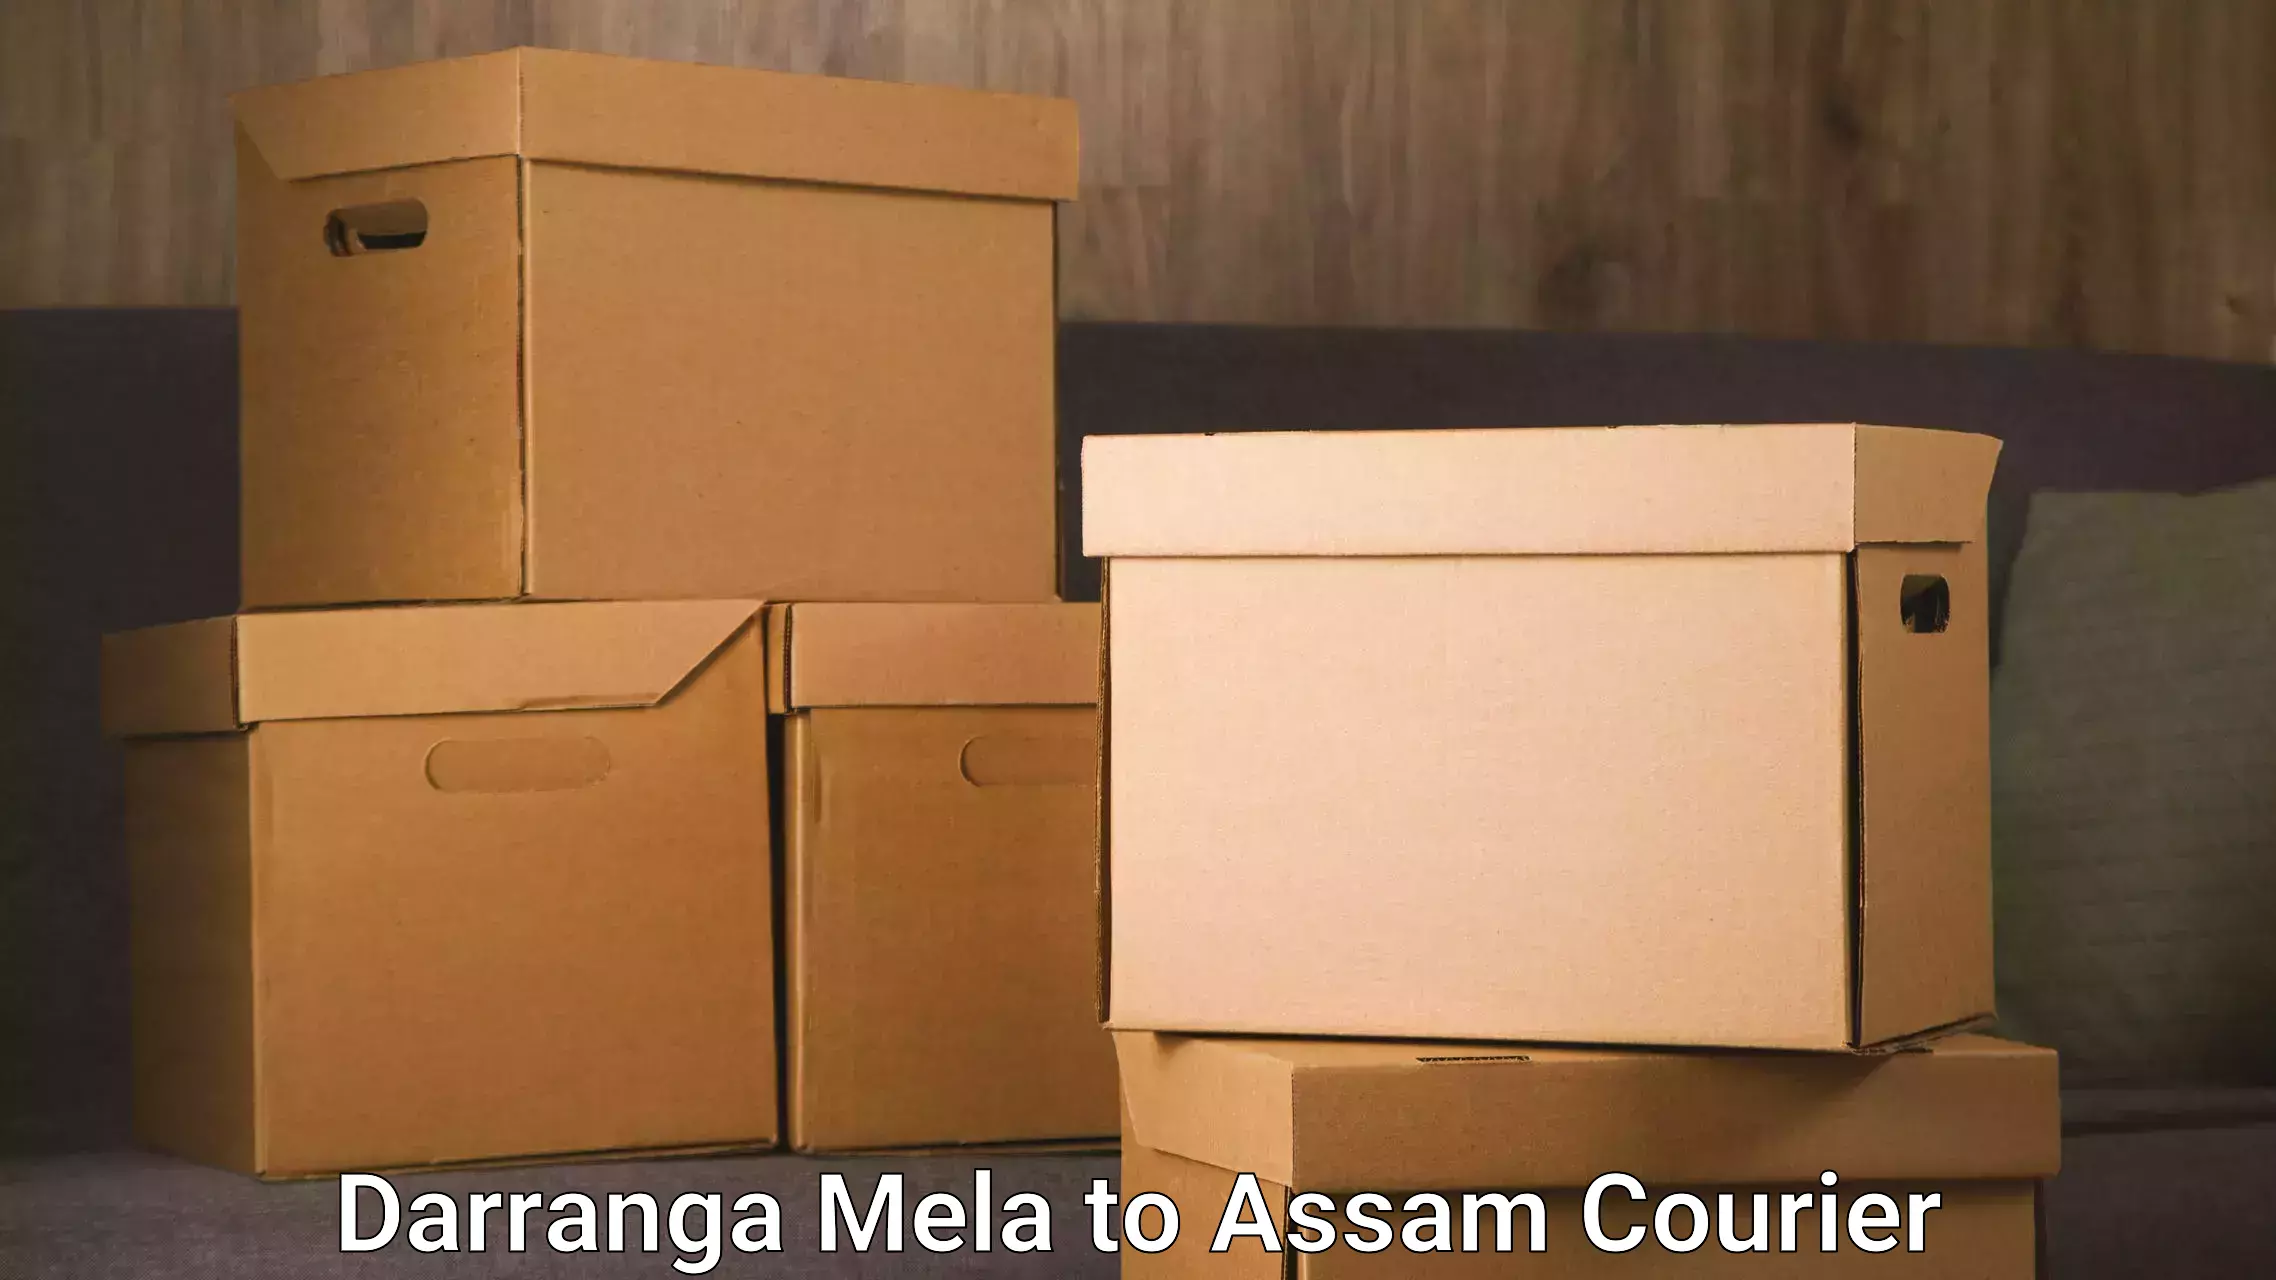 Professional delivery solutions in Darranga Mela to Assam